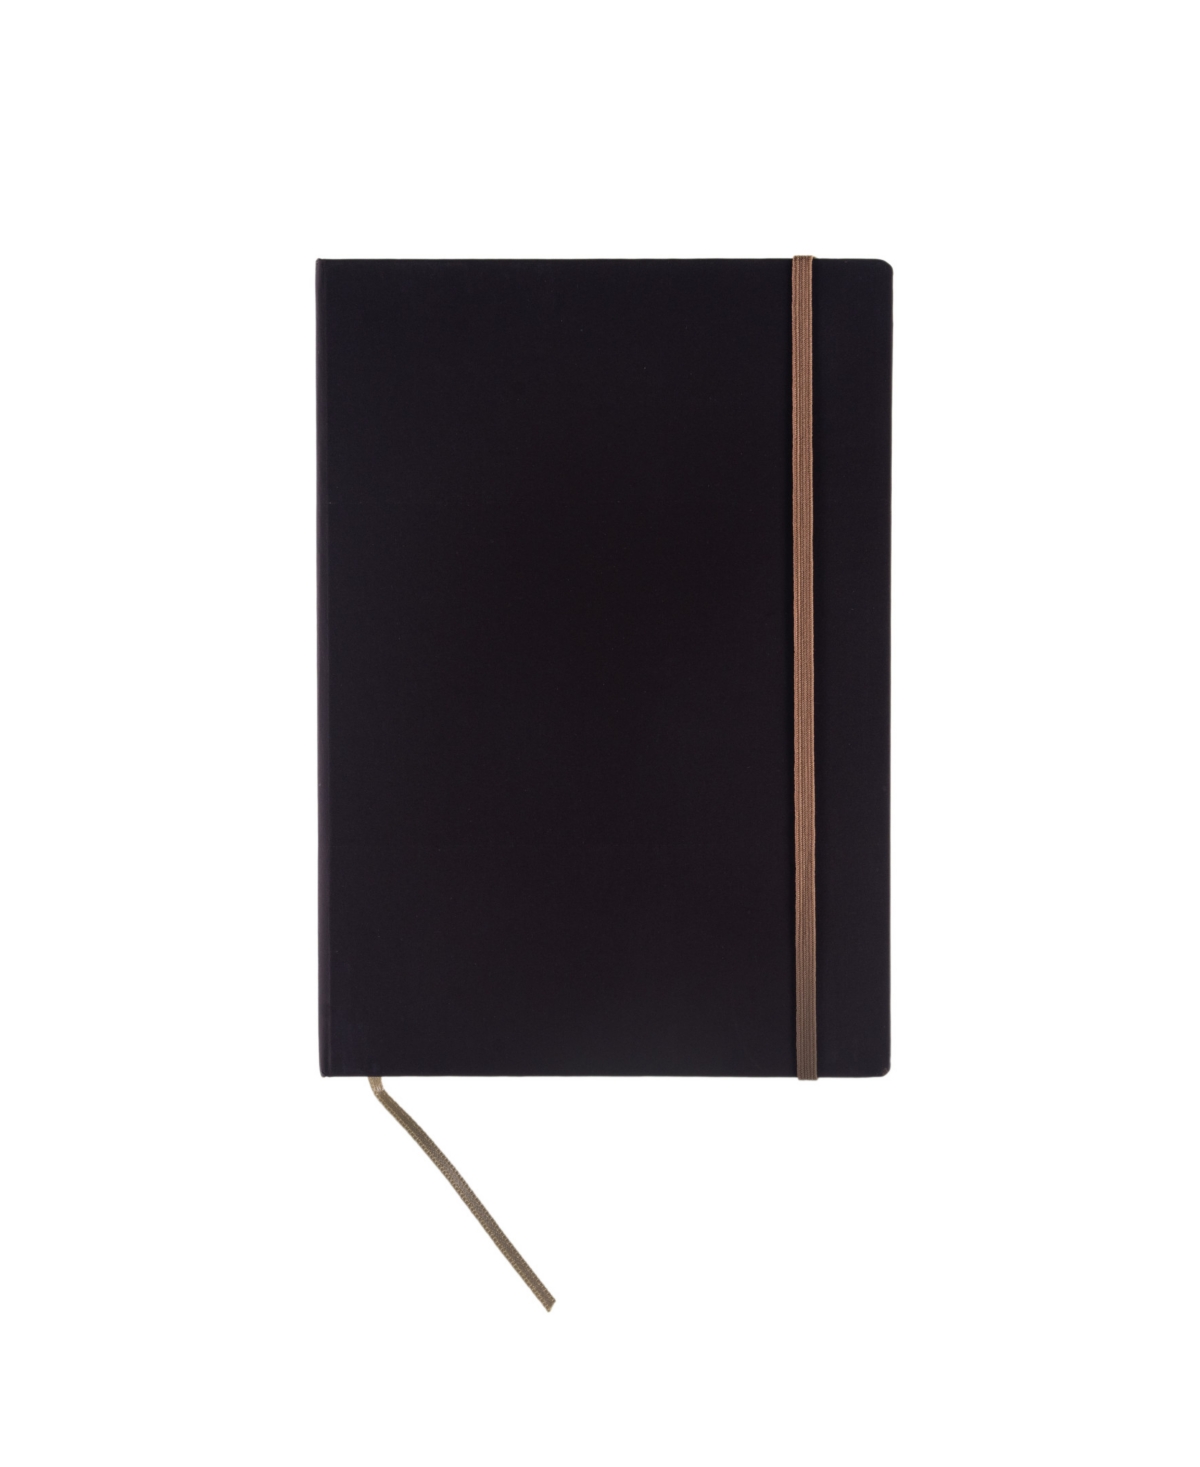 Ispira Hard Cover Lined A5 Notebook, 5.8" x 8.3" - Brown